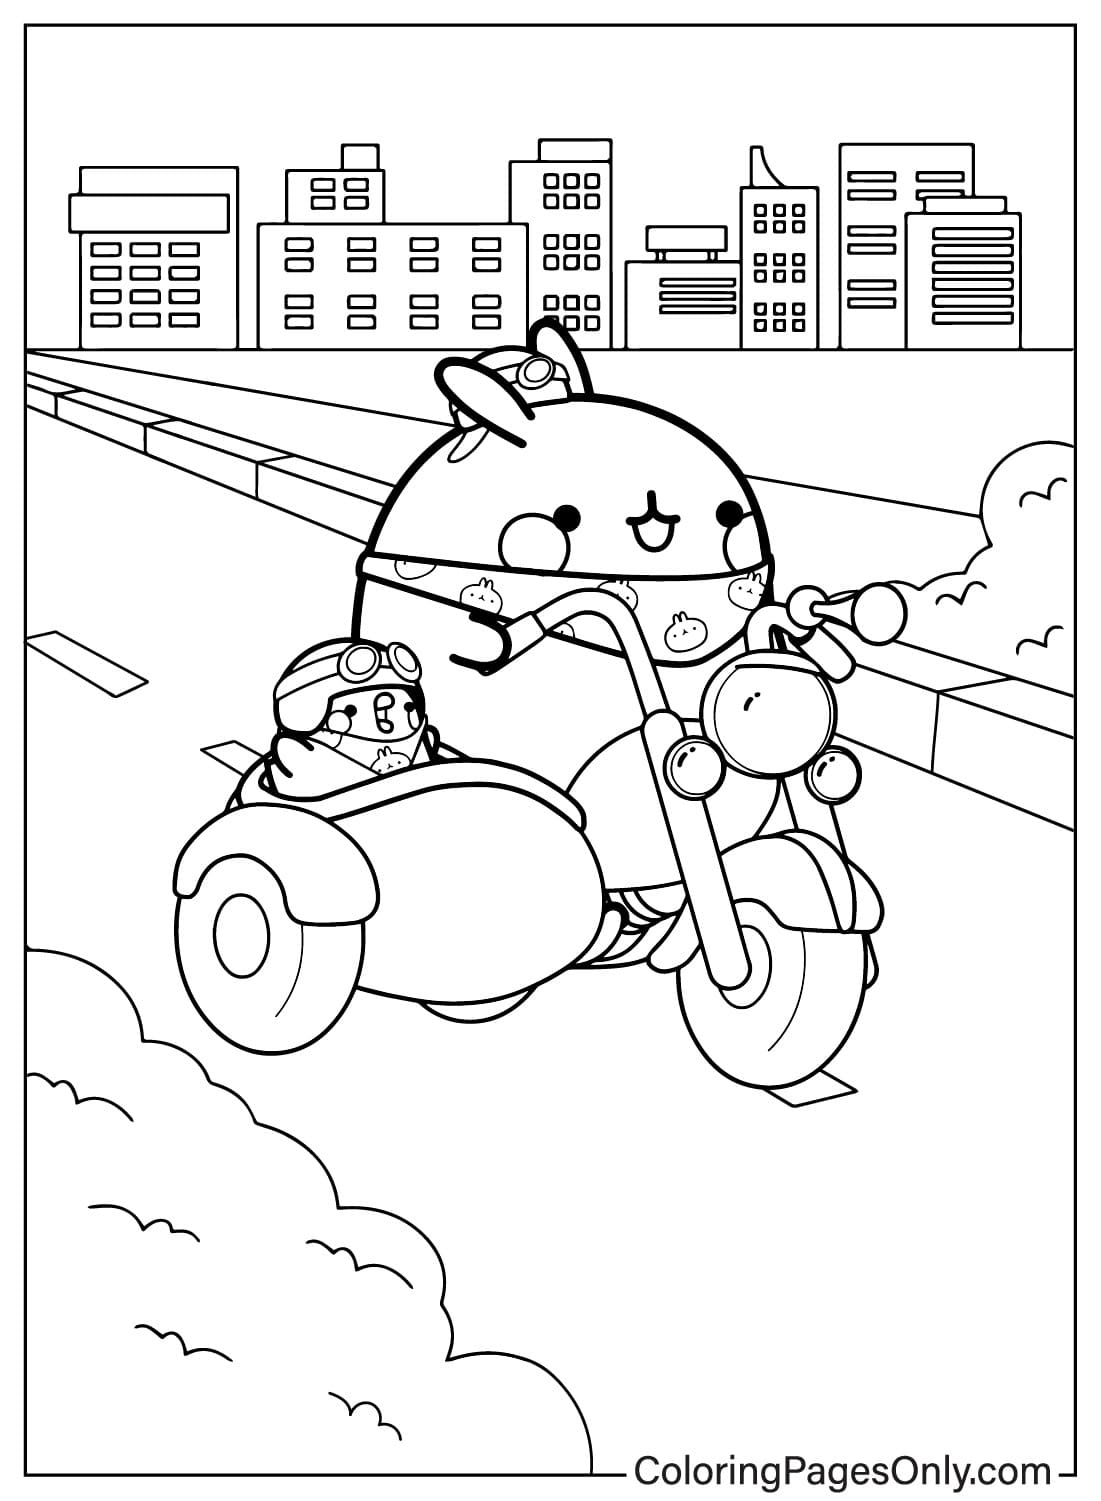 Motorcycle Coloring Book with Molang from Molang